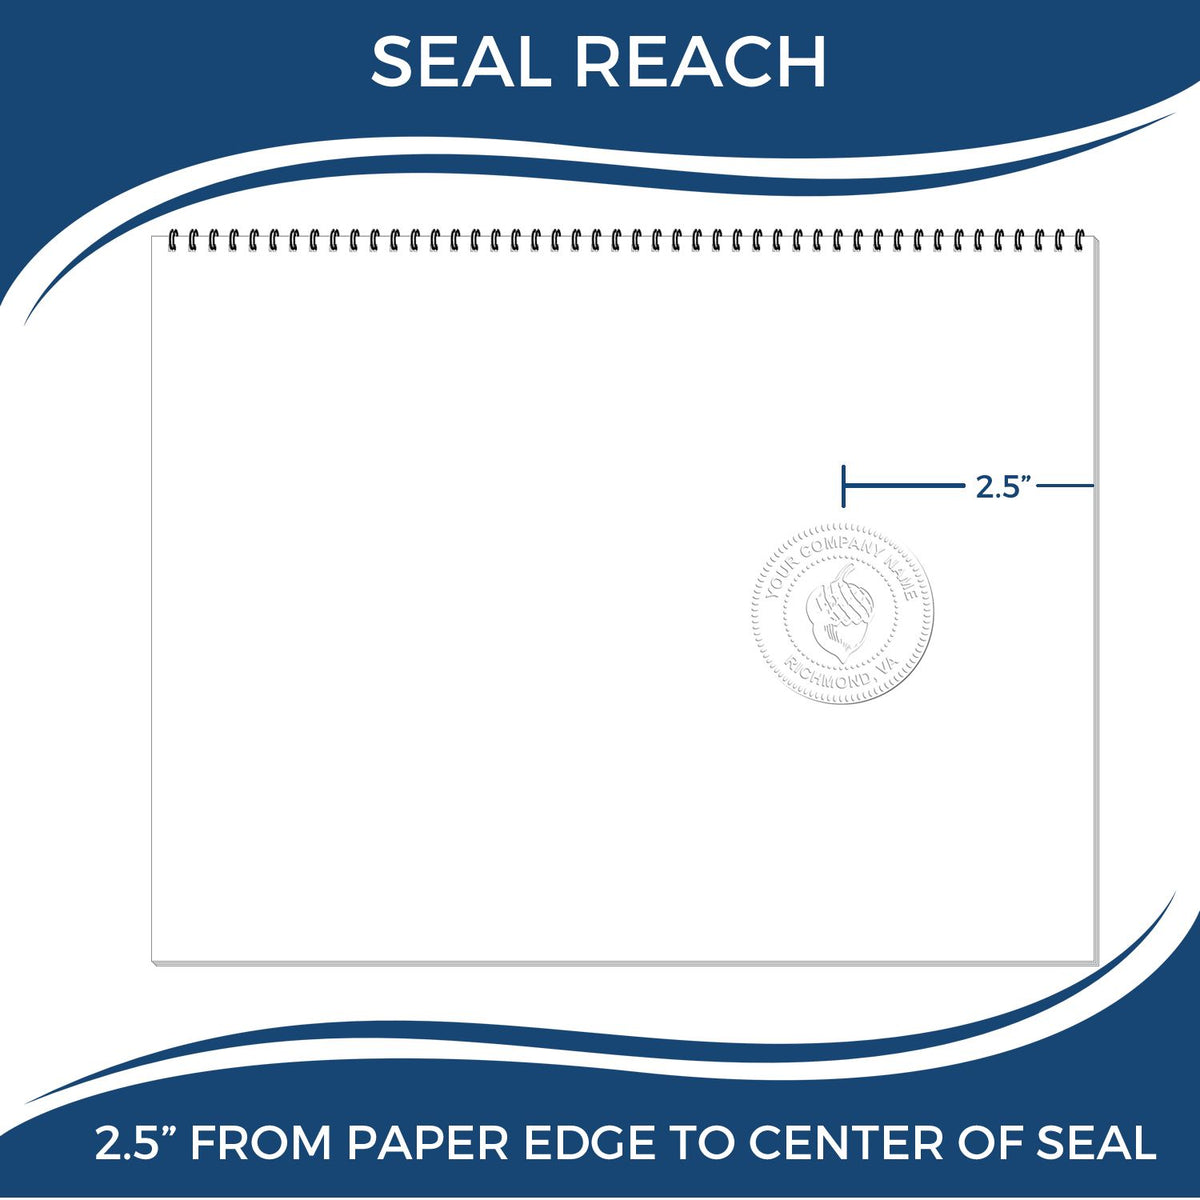 An infographic showing the seal reach which is represented by a ruler and a miniature seal image of the Long Reach Maine Geology Seal